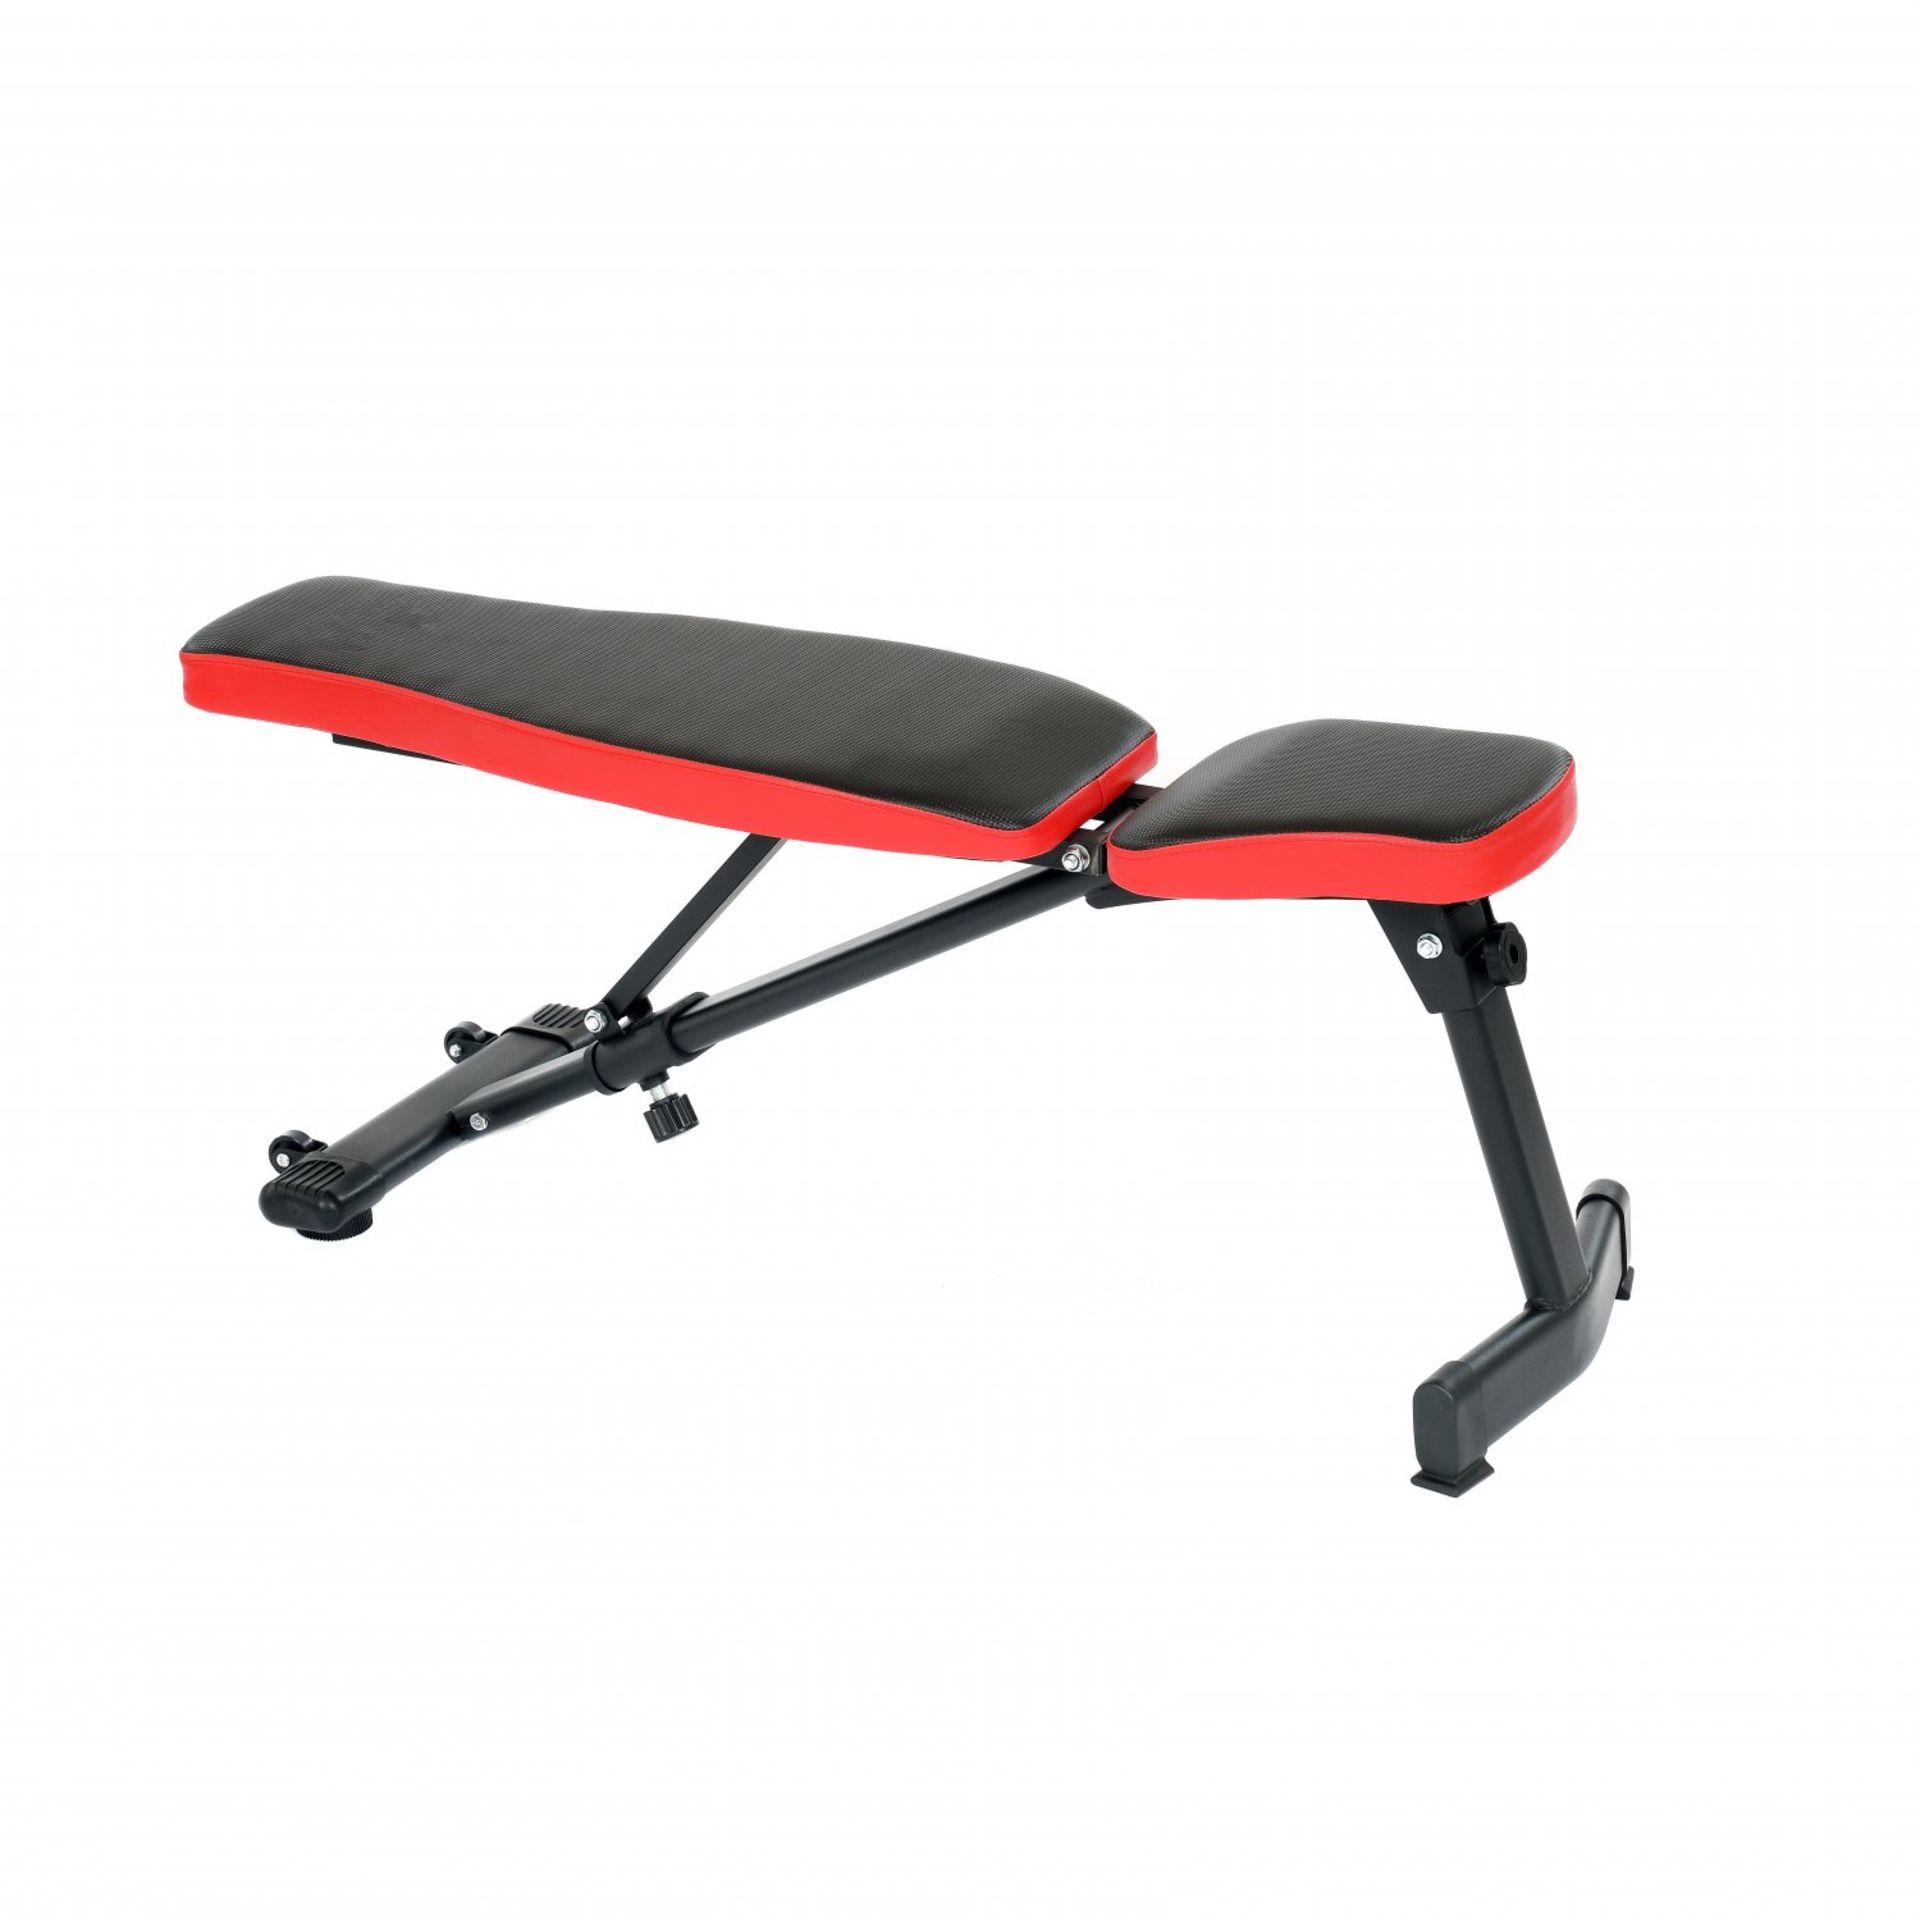 (SK27) Adjustable Folding Fitness Weight Lifting Bench Incline Decline The weight bench is... - Image 4 of 4